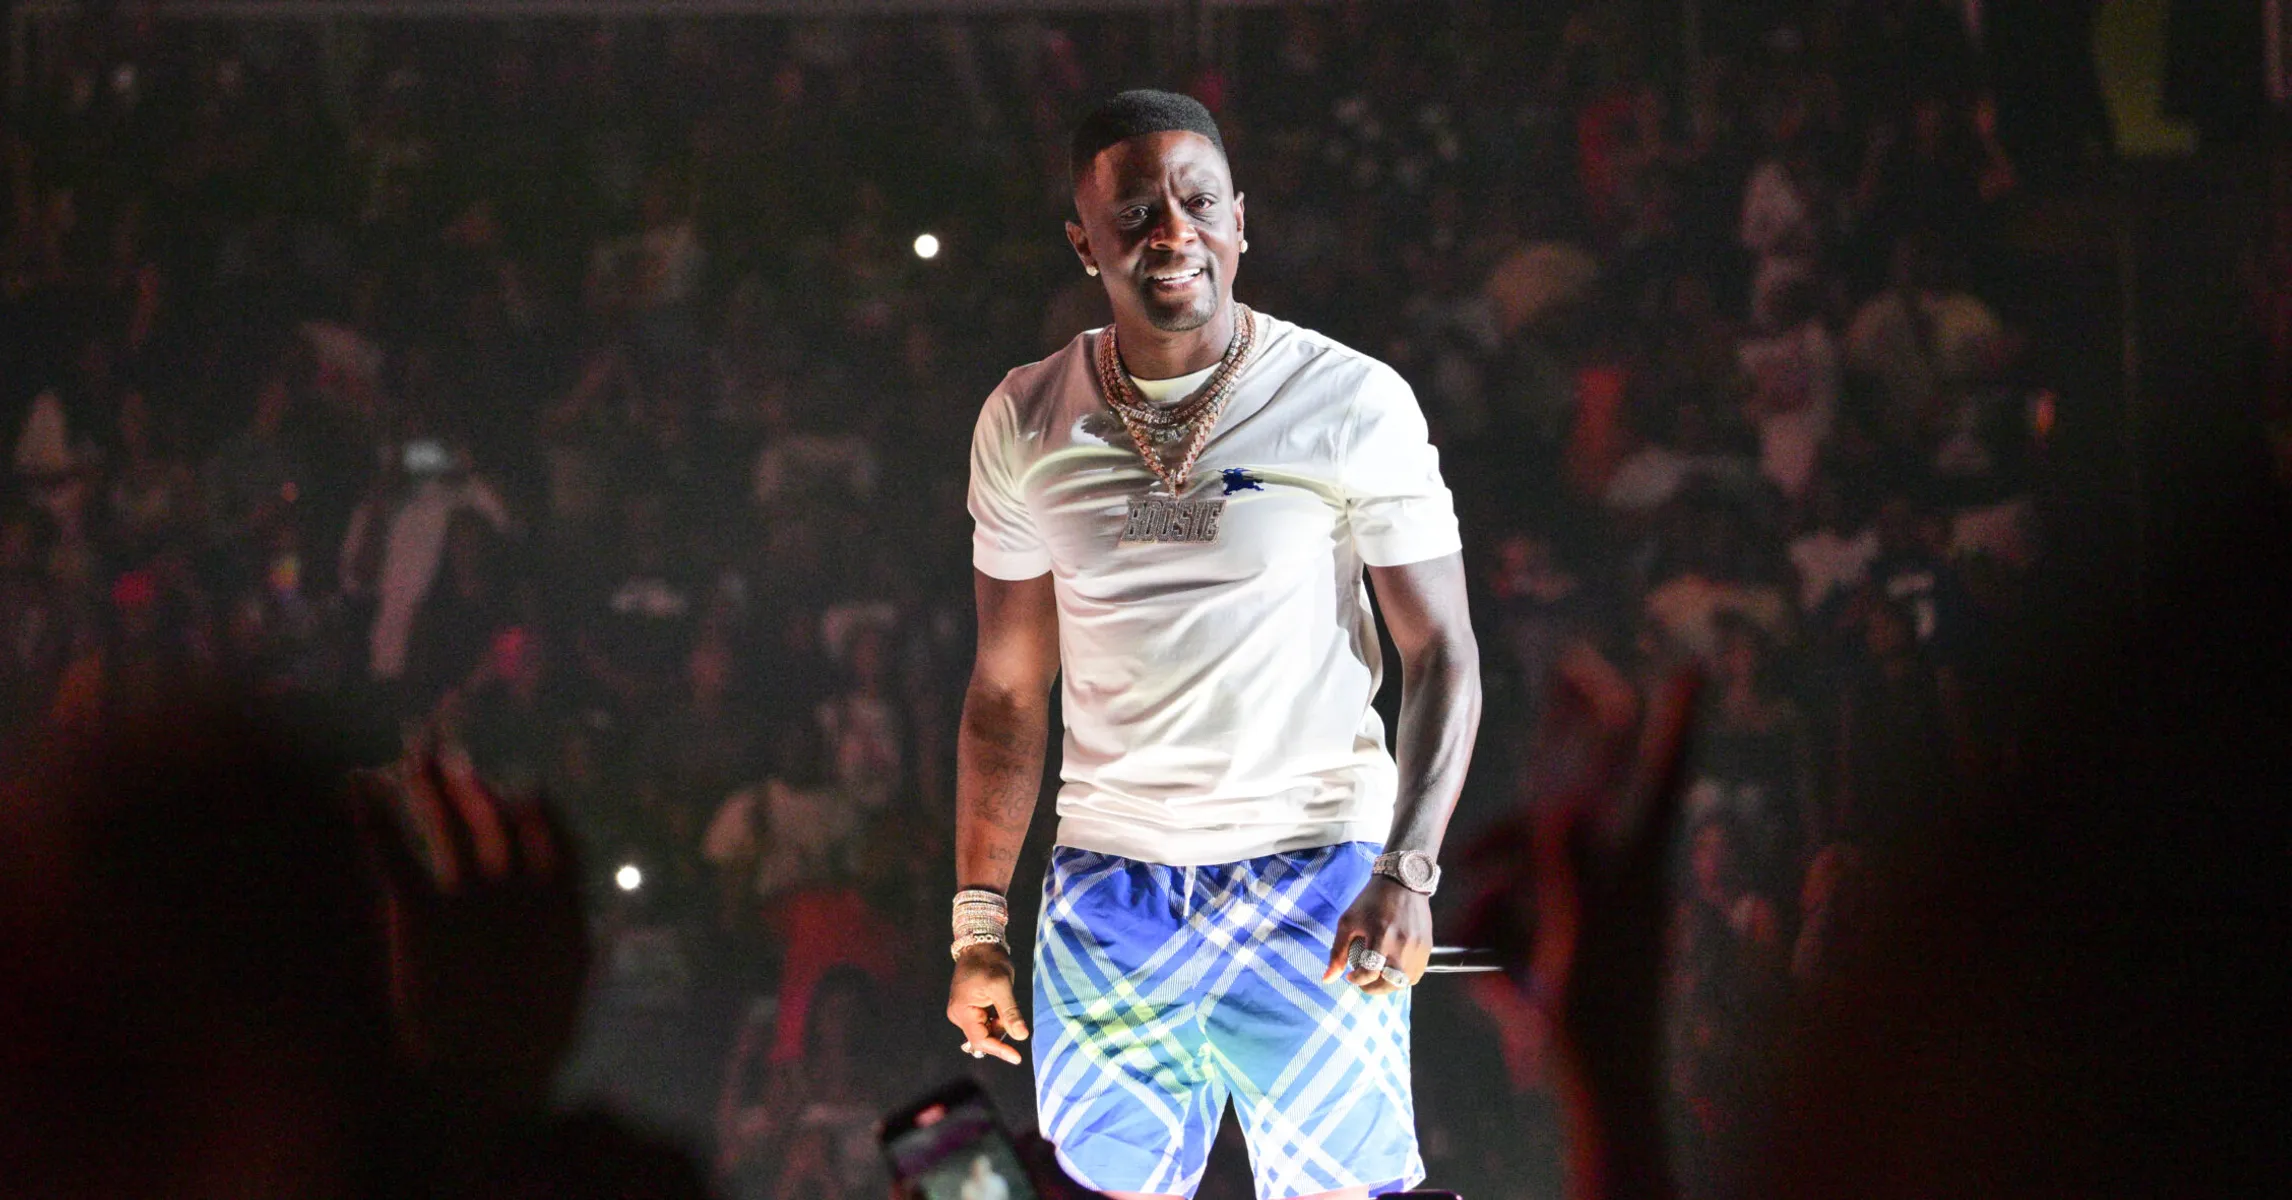 Boosie Badazz reportedly kicks a fan out of the club for complaining about the rapper’s smell